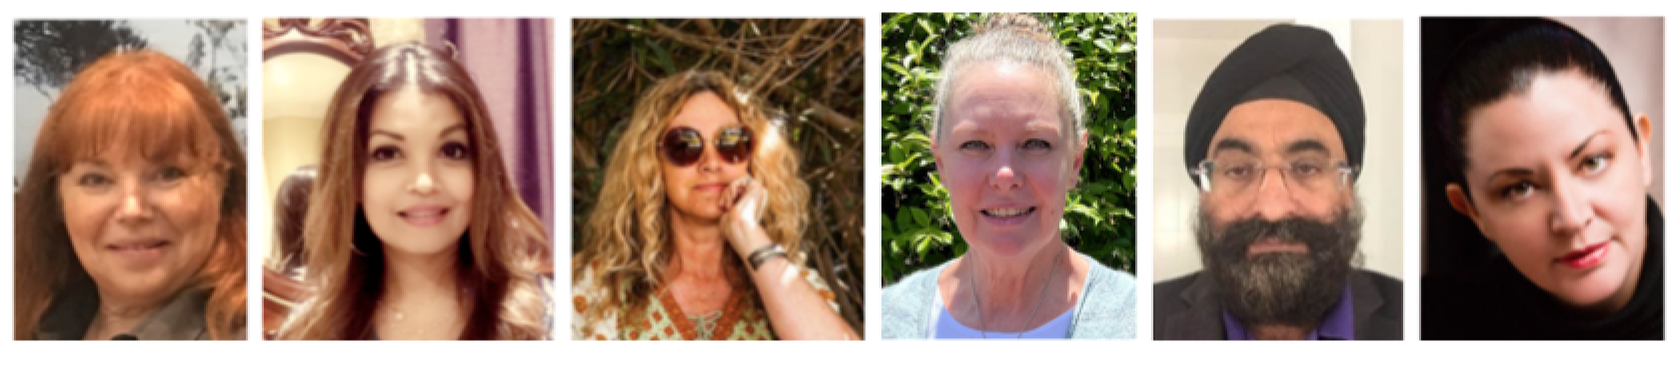 Dianne Correl, Certified Essential Oils Producer, Angela Vrettas, Dr Danica-Lea Larcombe, Michelle Palmer, Param Singh and Emma Leah, Certified Natural Perfumers.